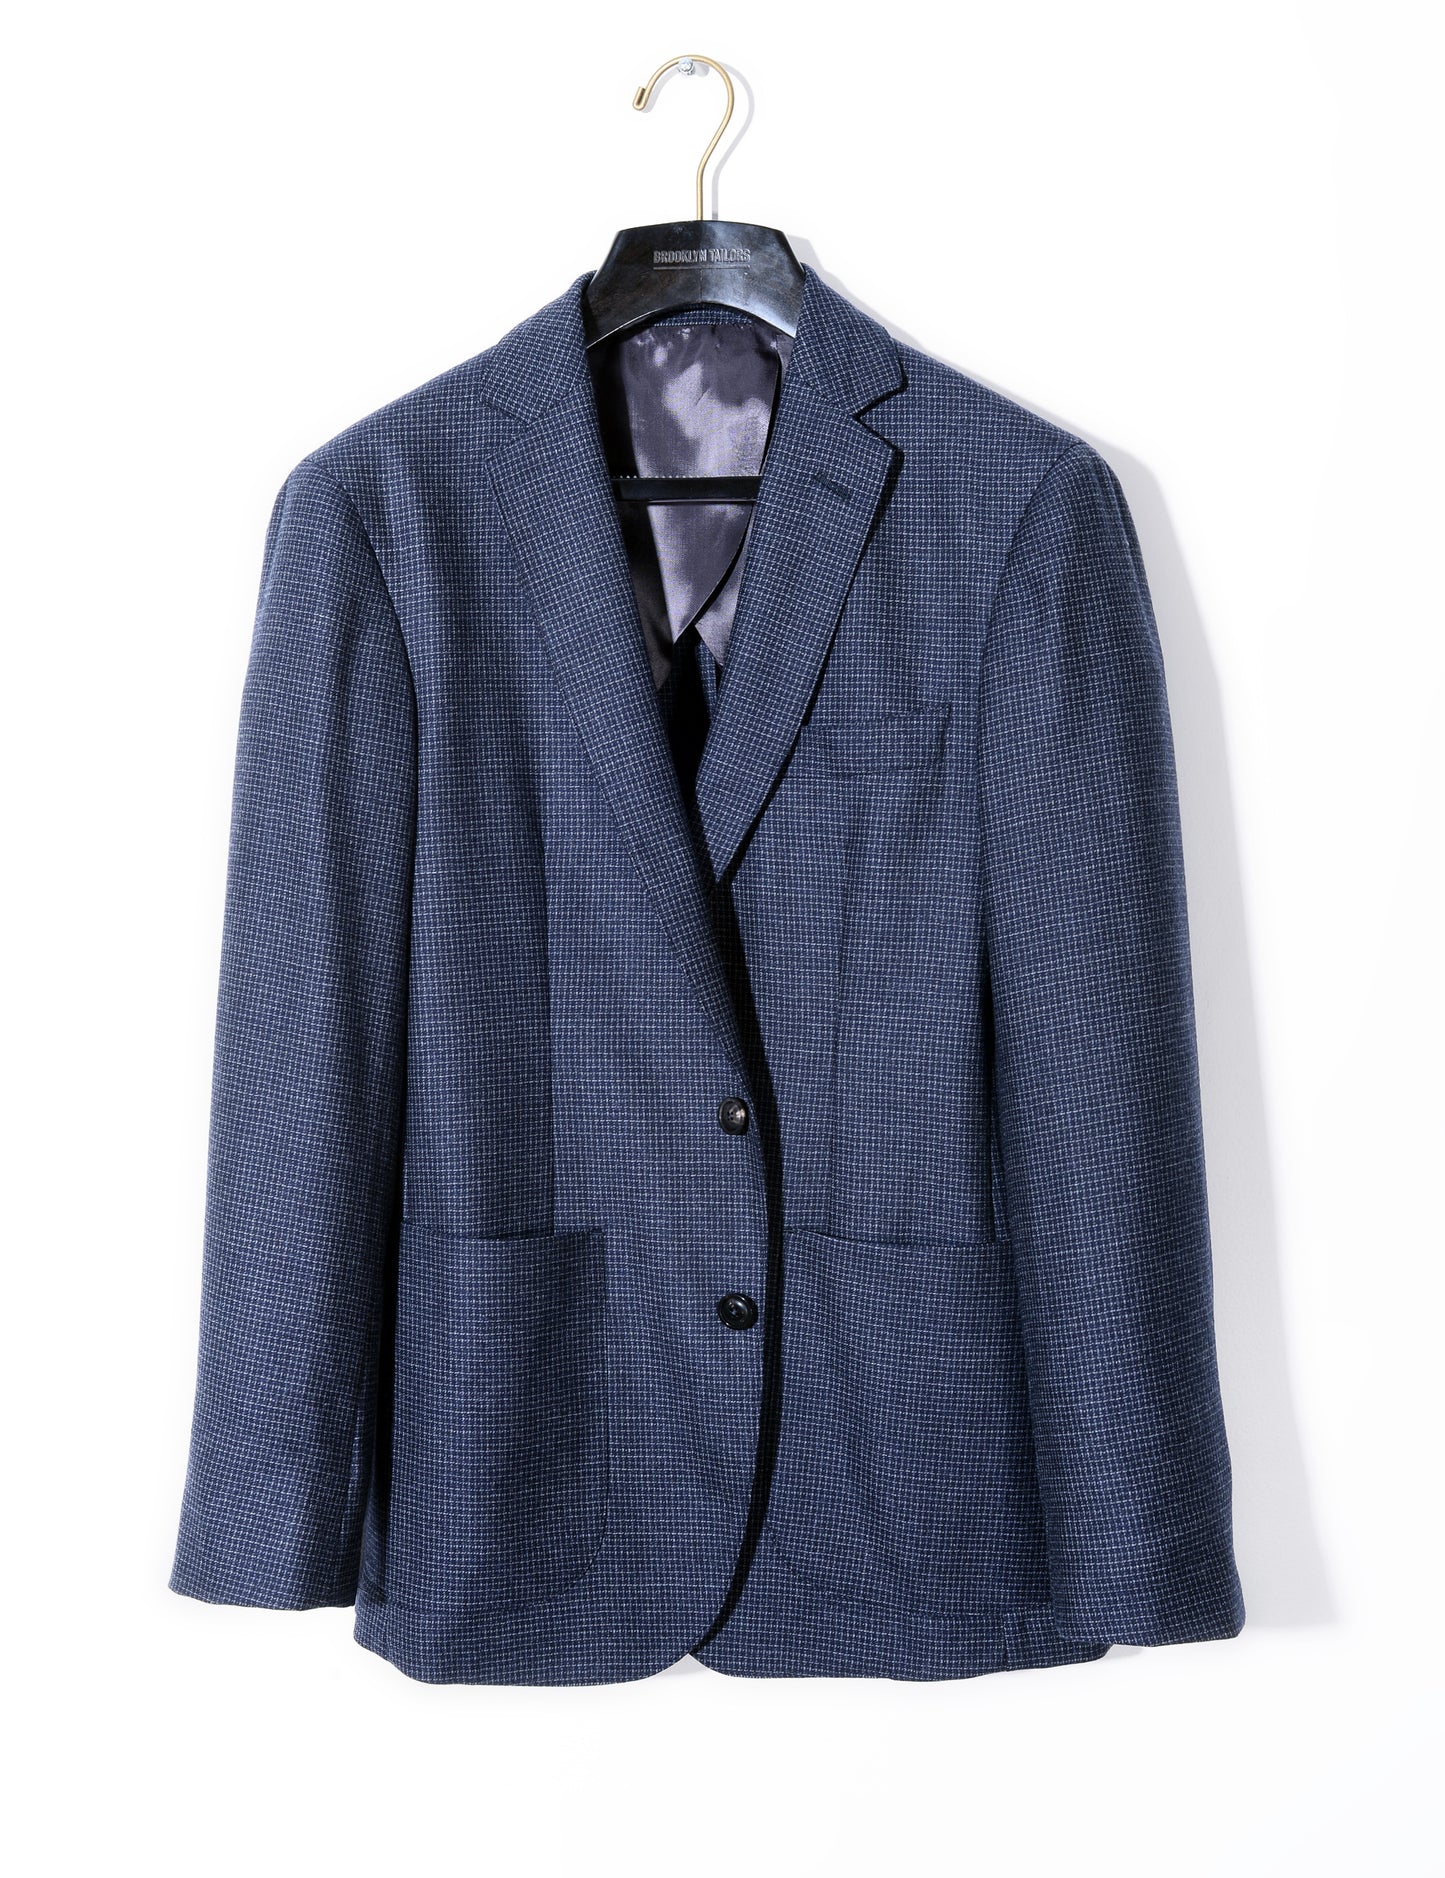 BKT35 Unstructured Jacket in Brushed Wool Microgrid - Navy